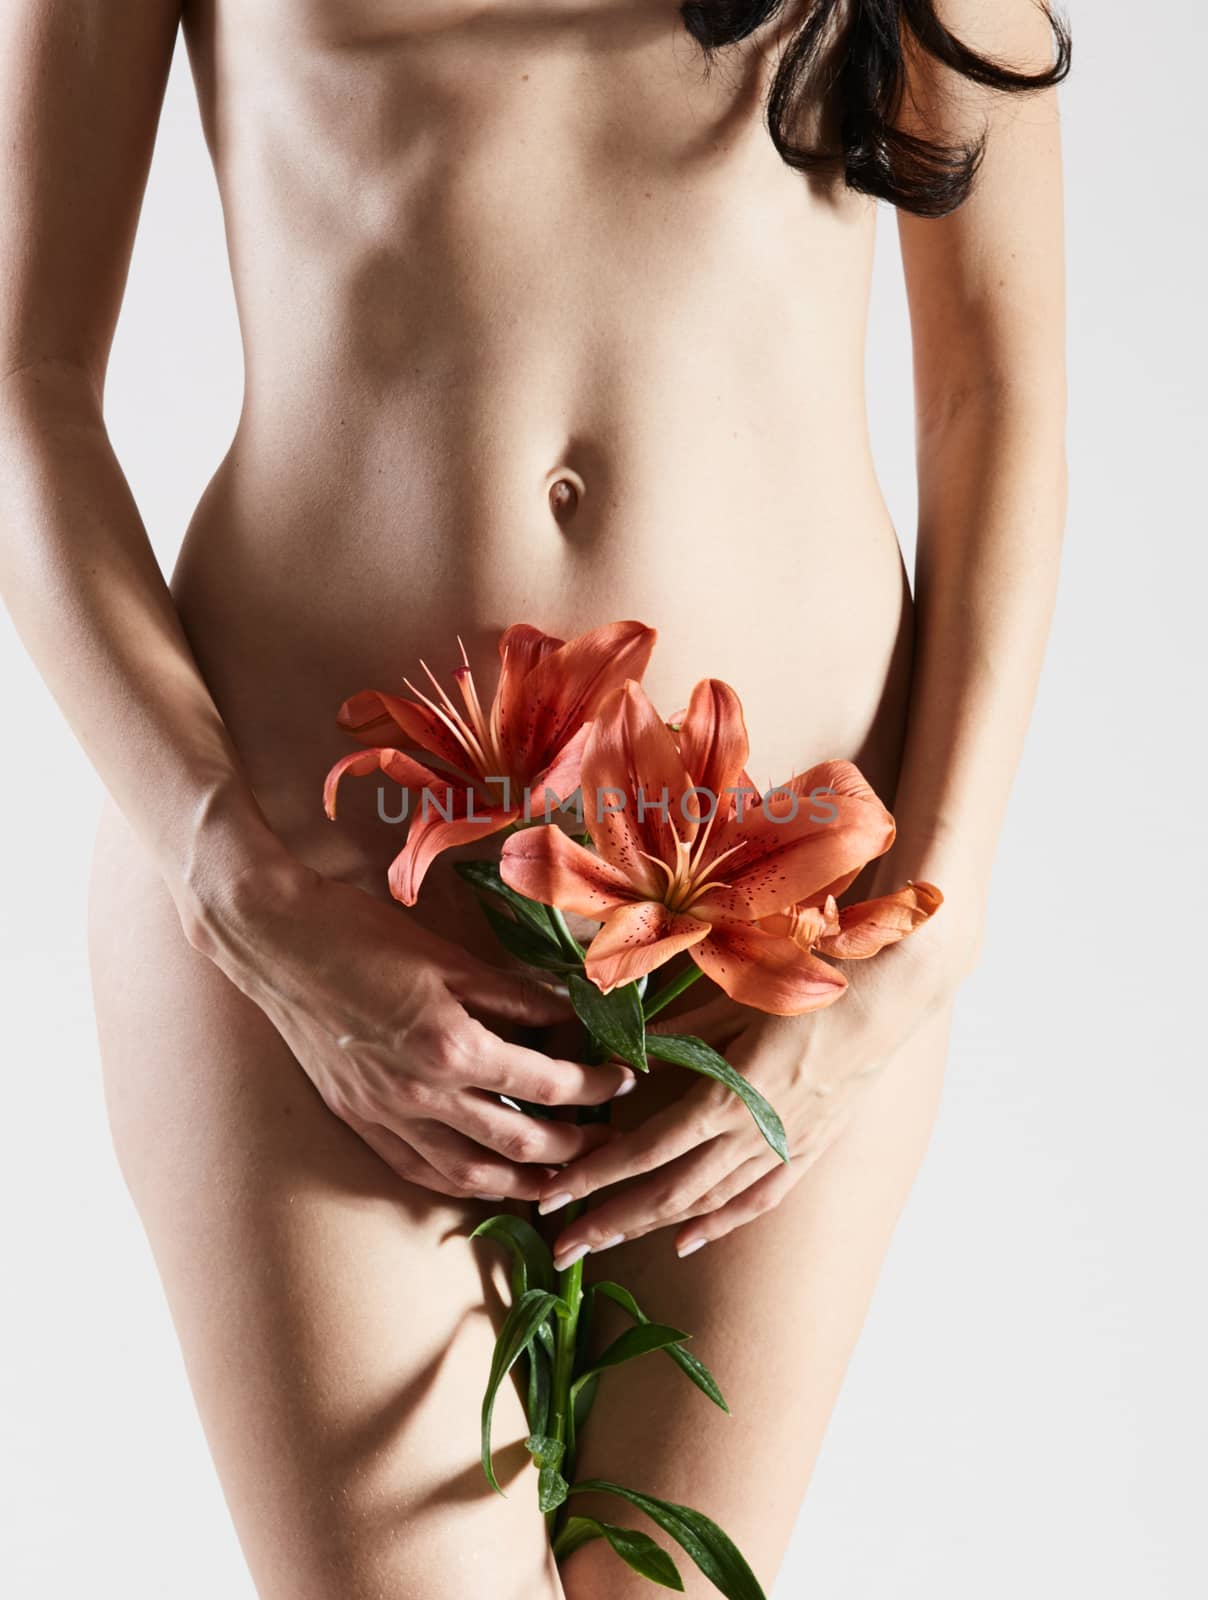 Intimate part of a woman's body with flower in hands. Close up of a woman body with flower on her pubes. No retouch. by sarymsakov